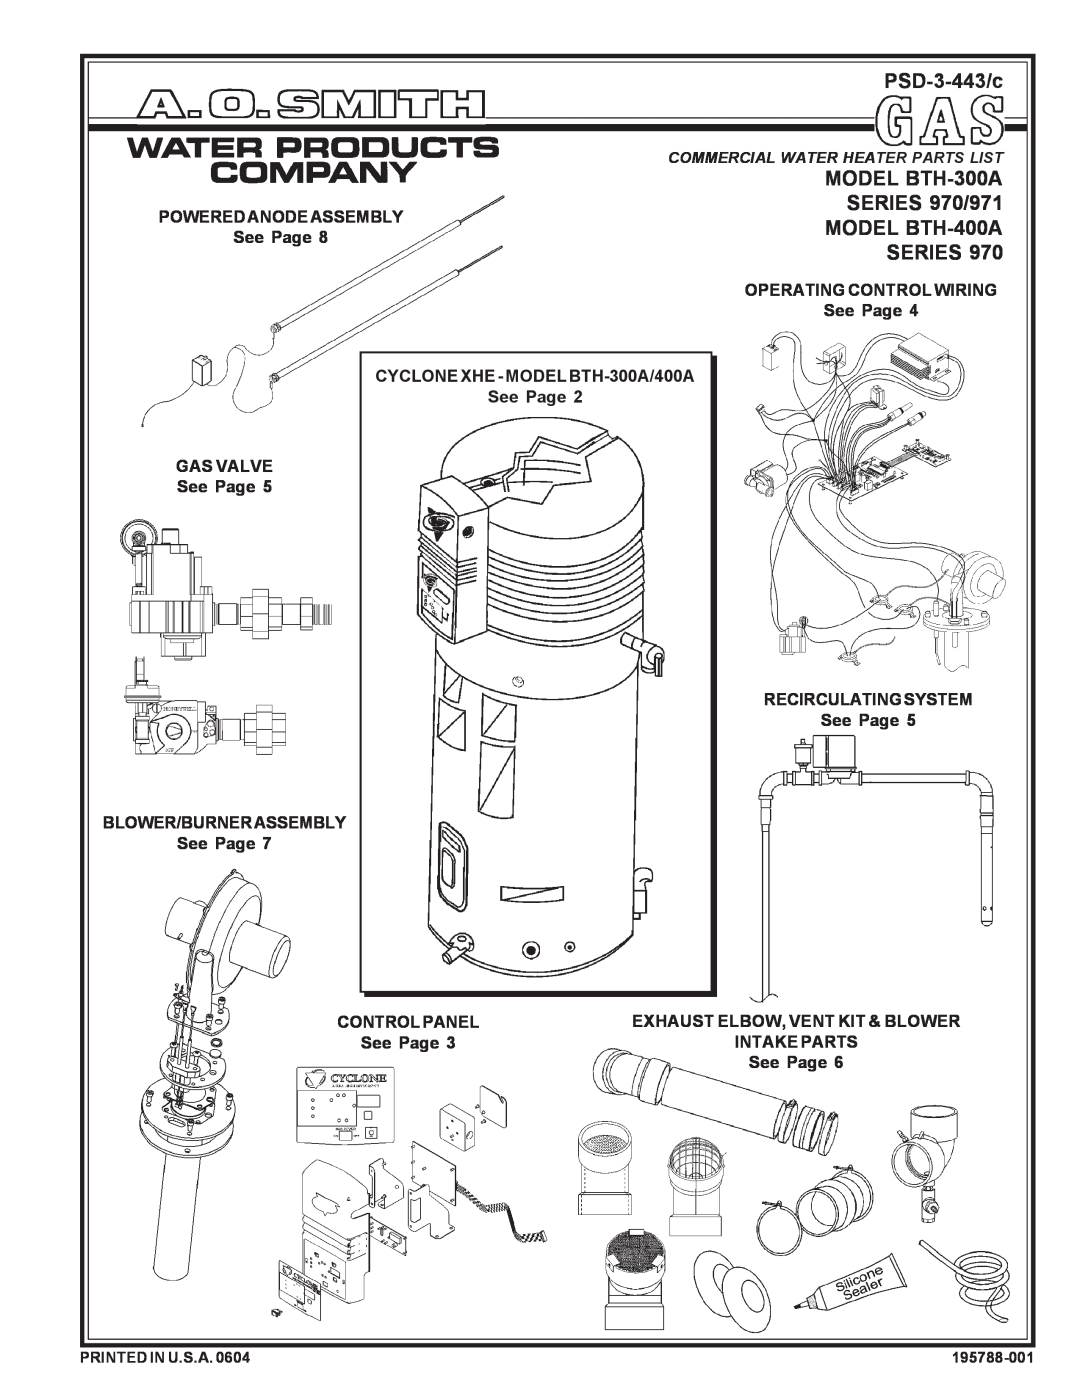 A.O. Smith 970 Series manual PSD-3-443/c, MODEL BTH-300A, SERIES 970/971, See Page 8MODEL BTH-400A SERIES, Controlpanel 